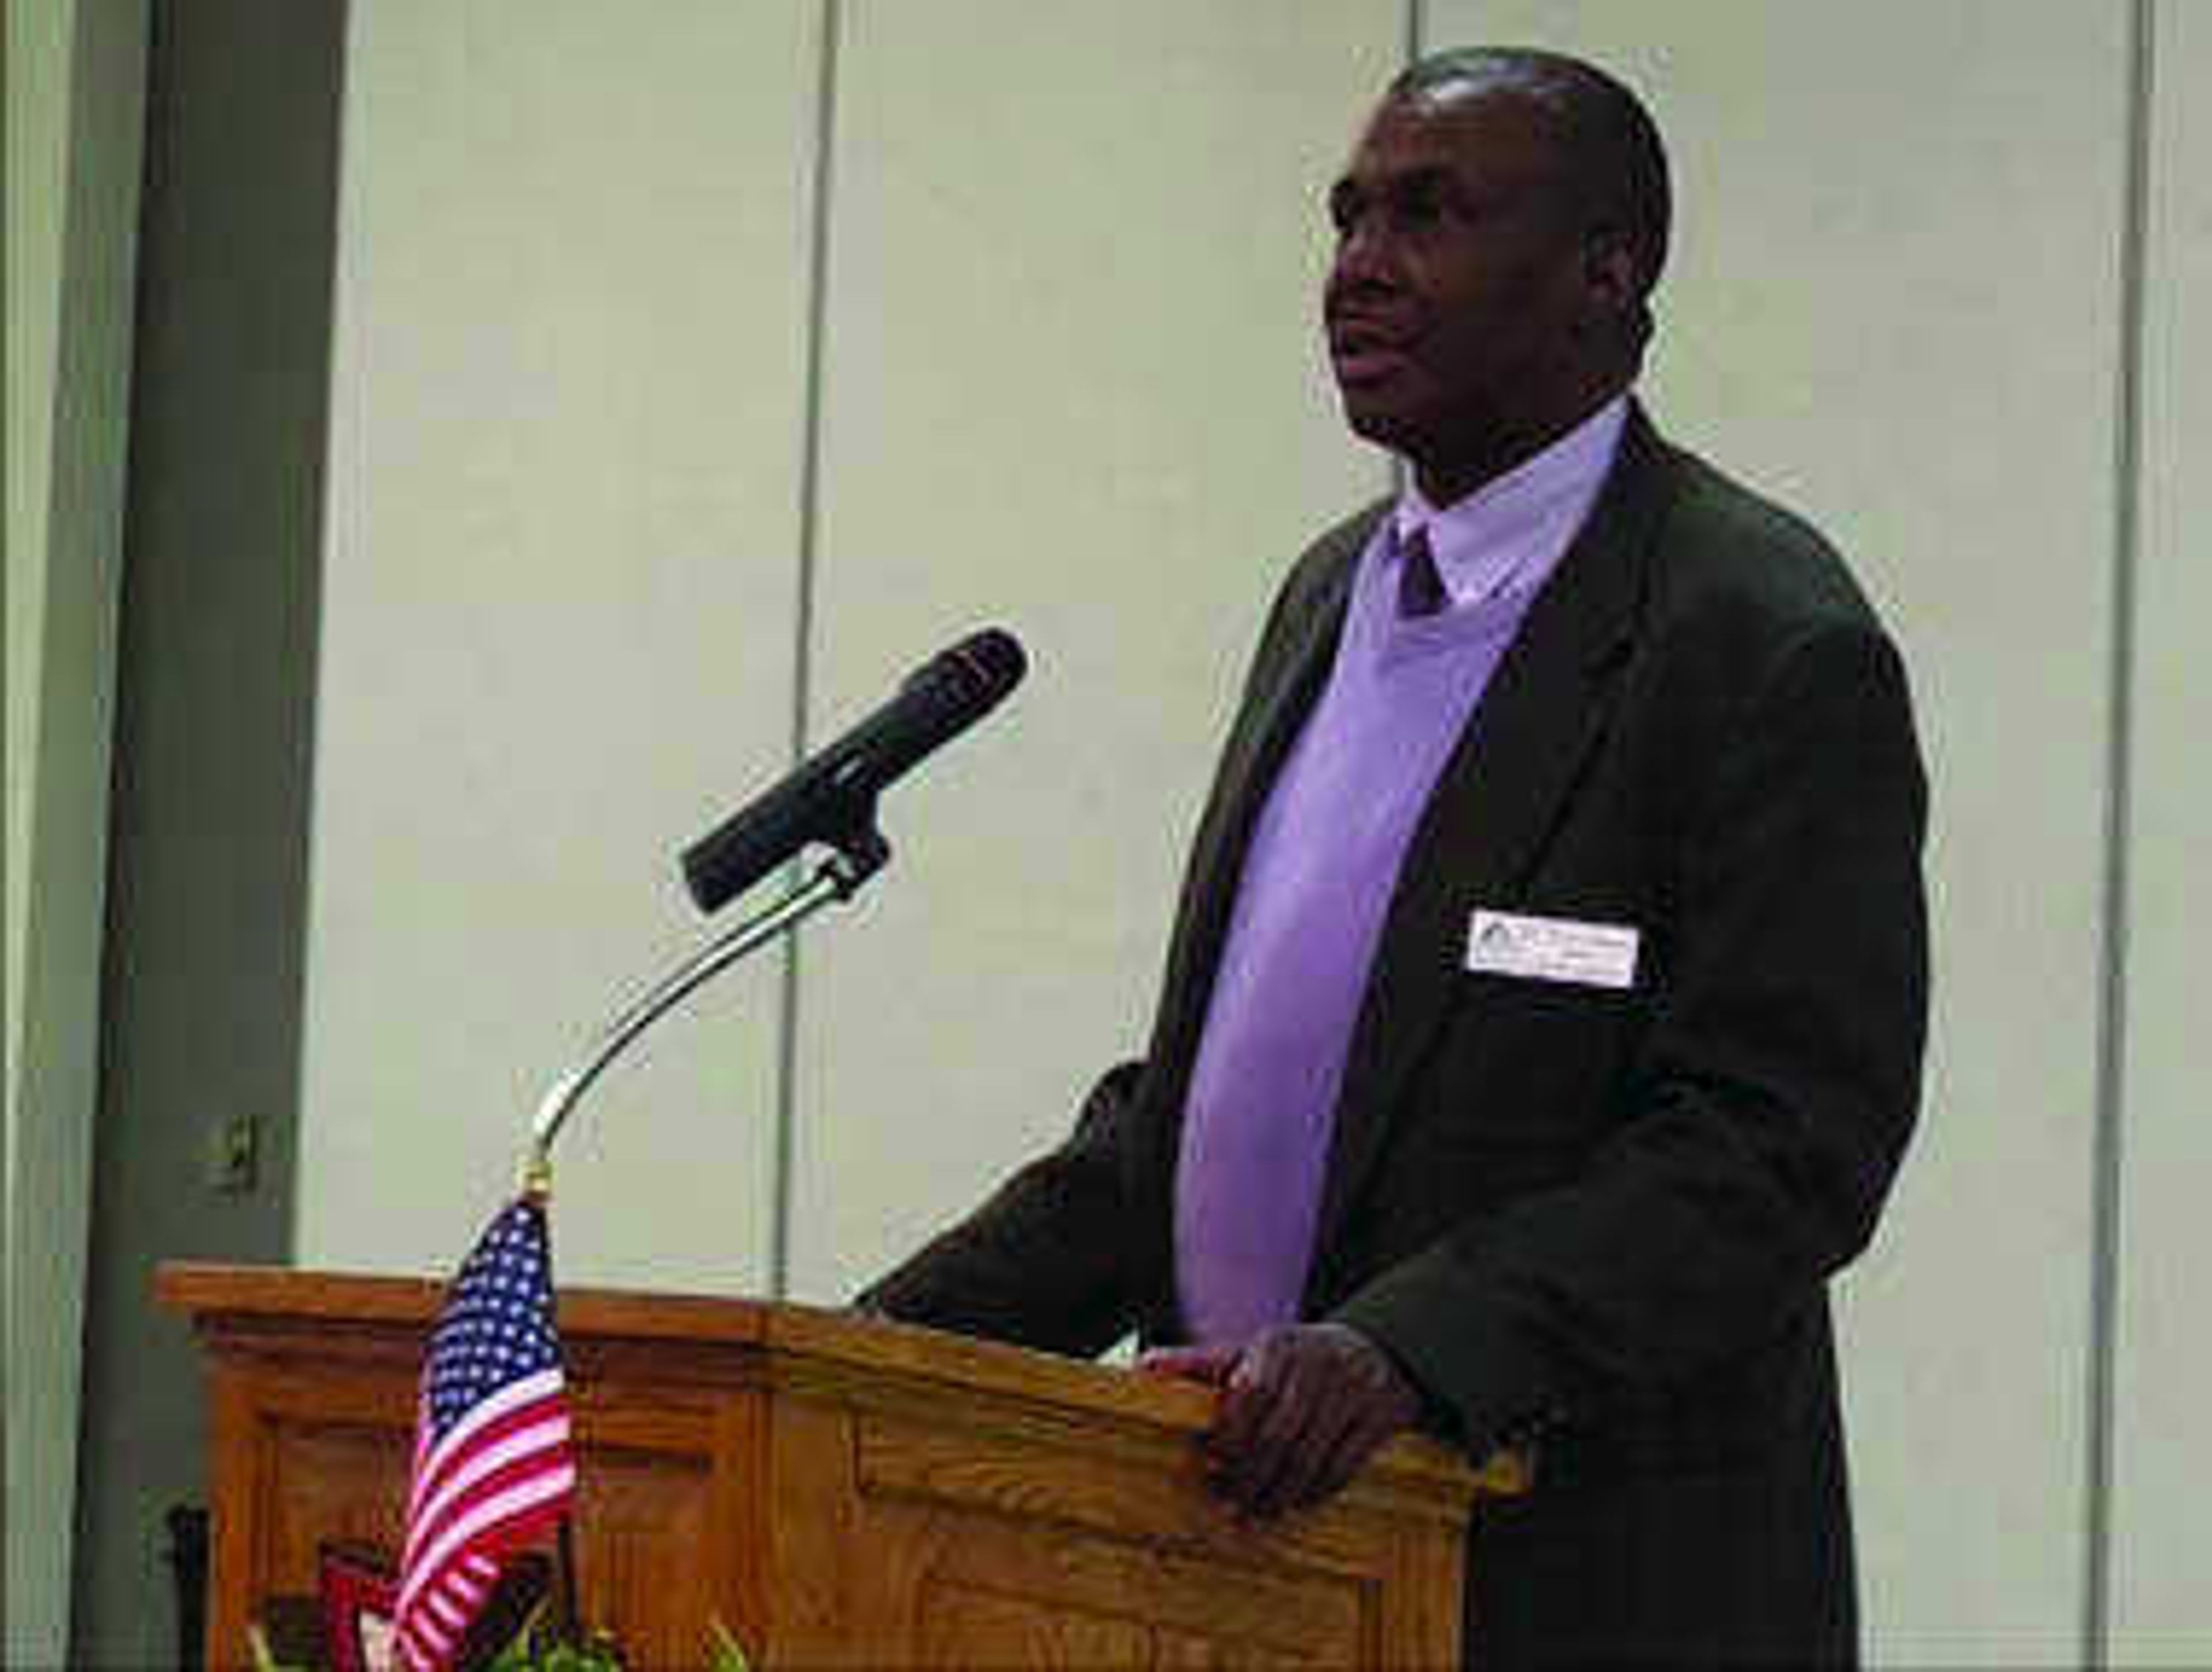 Jenkins gave opening remarks at the event. Photo by Doc Fiandaca